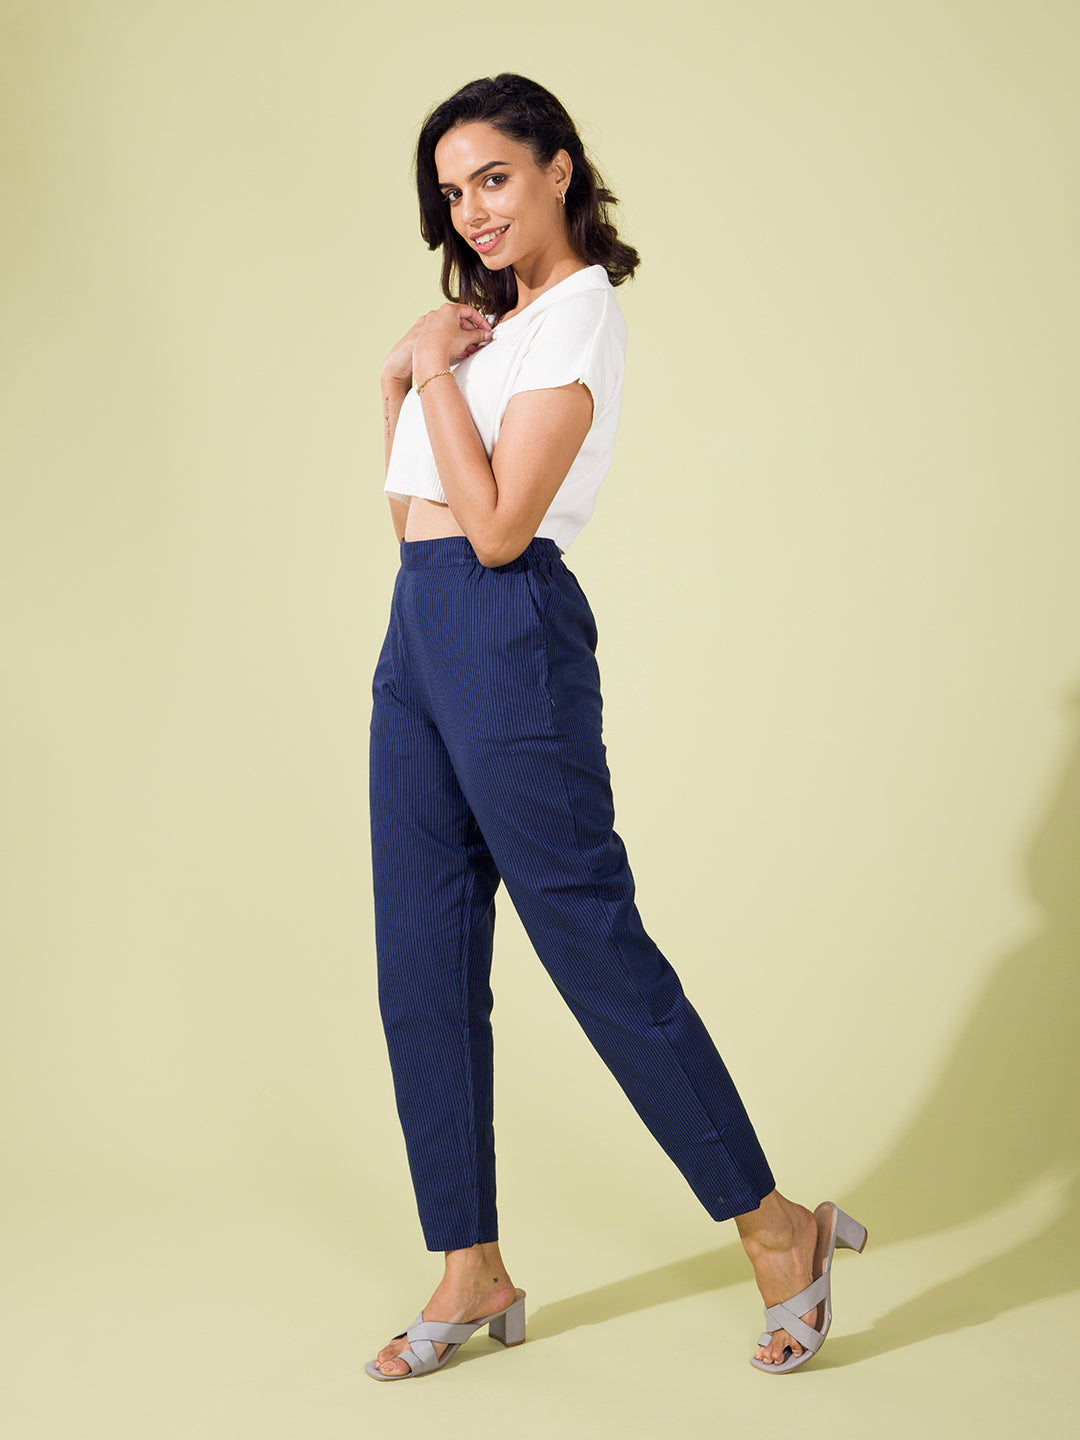 work attire | Casual work outfits, Work outfit, Work outfits women